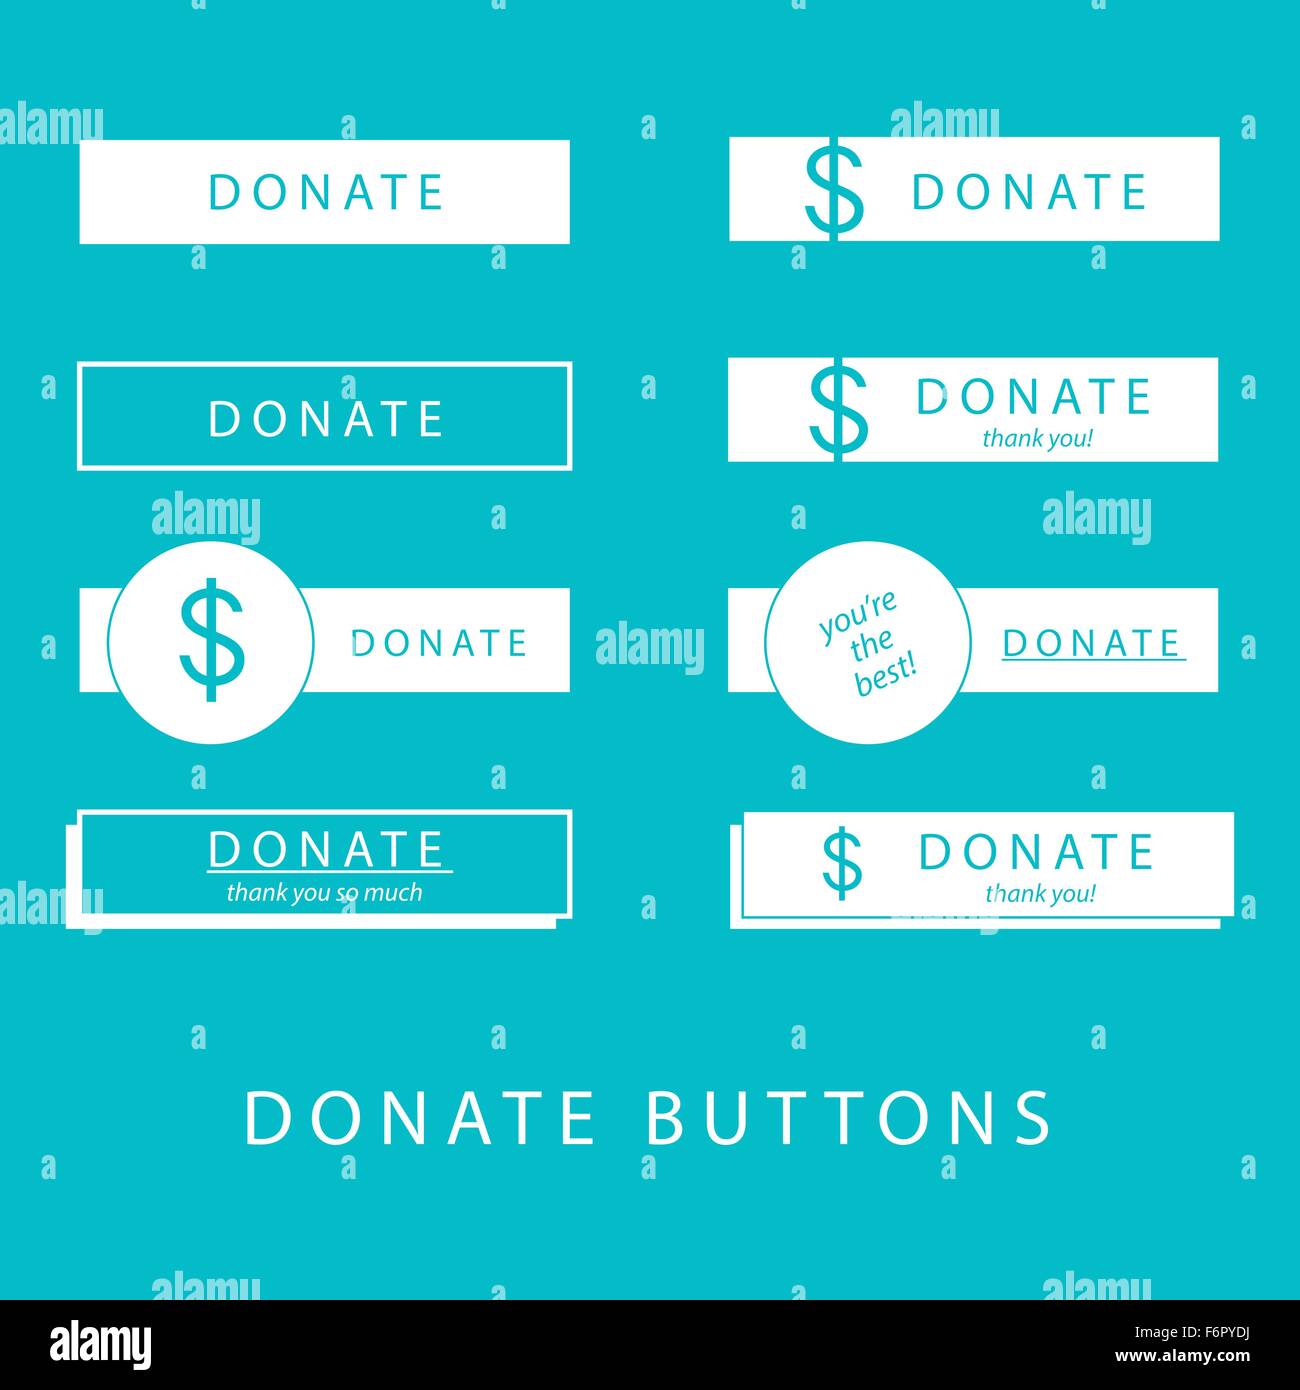 Donate buttons in simple, flat design vector style for website donations Stock Vector